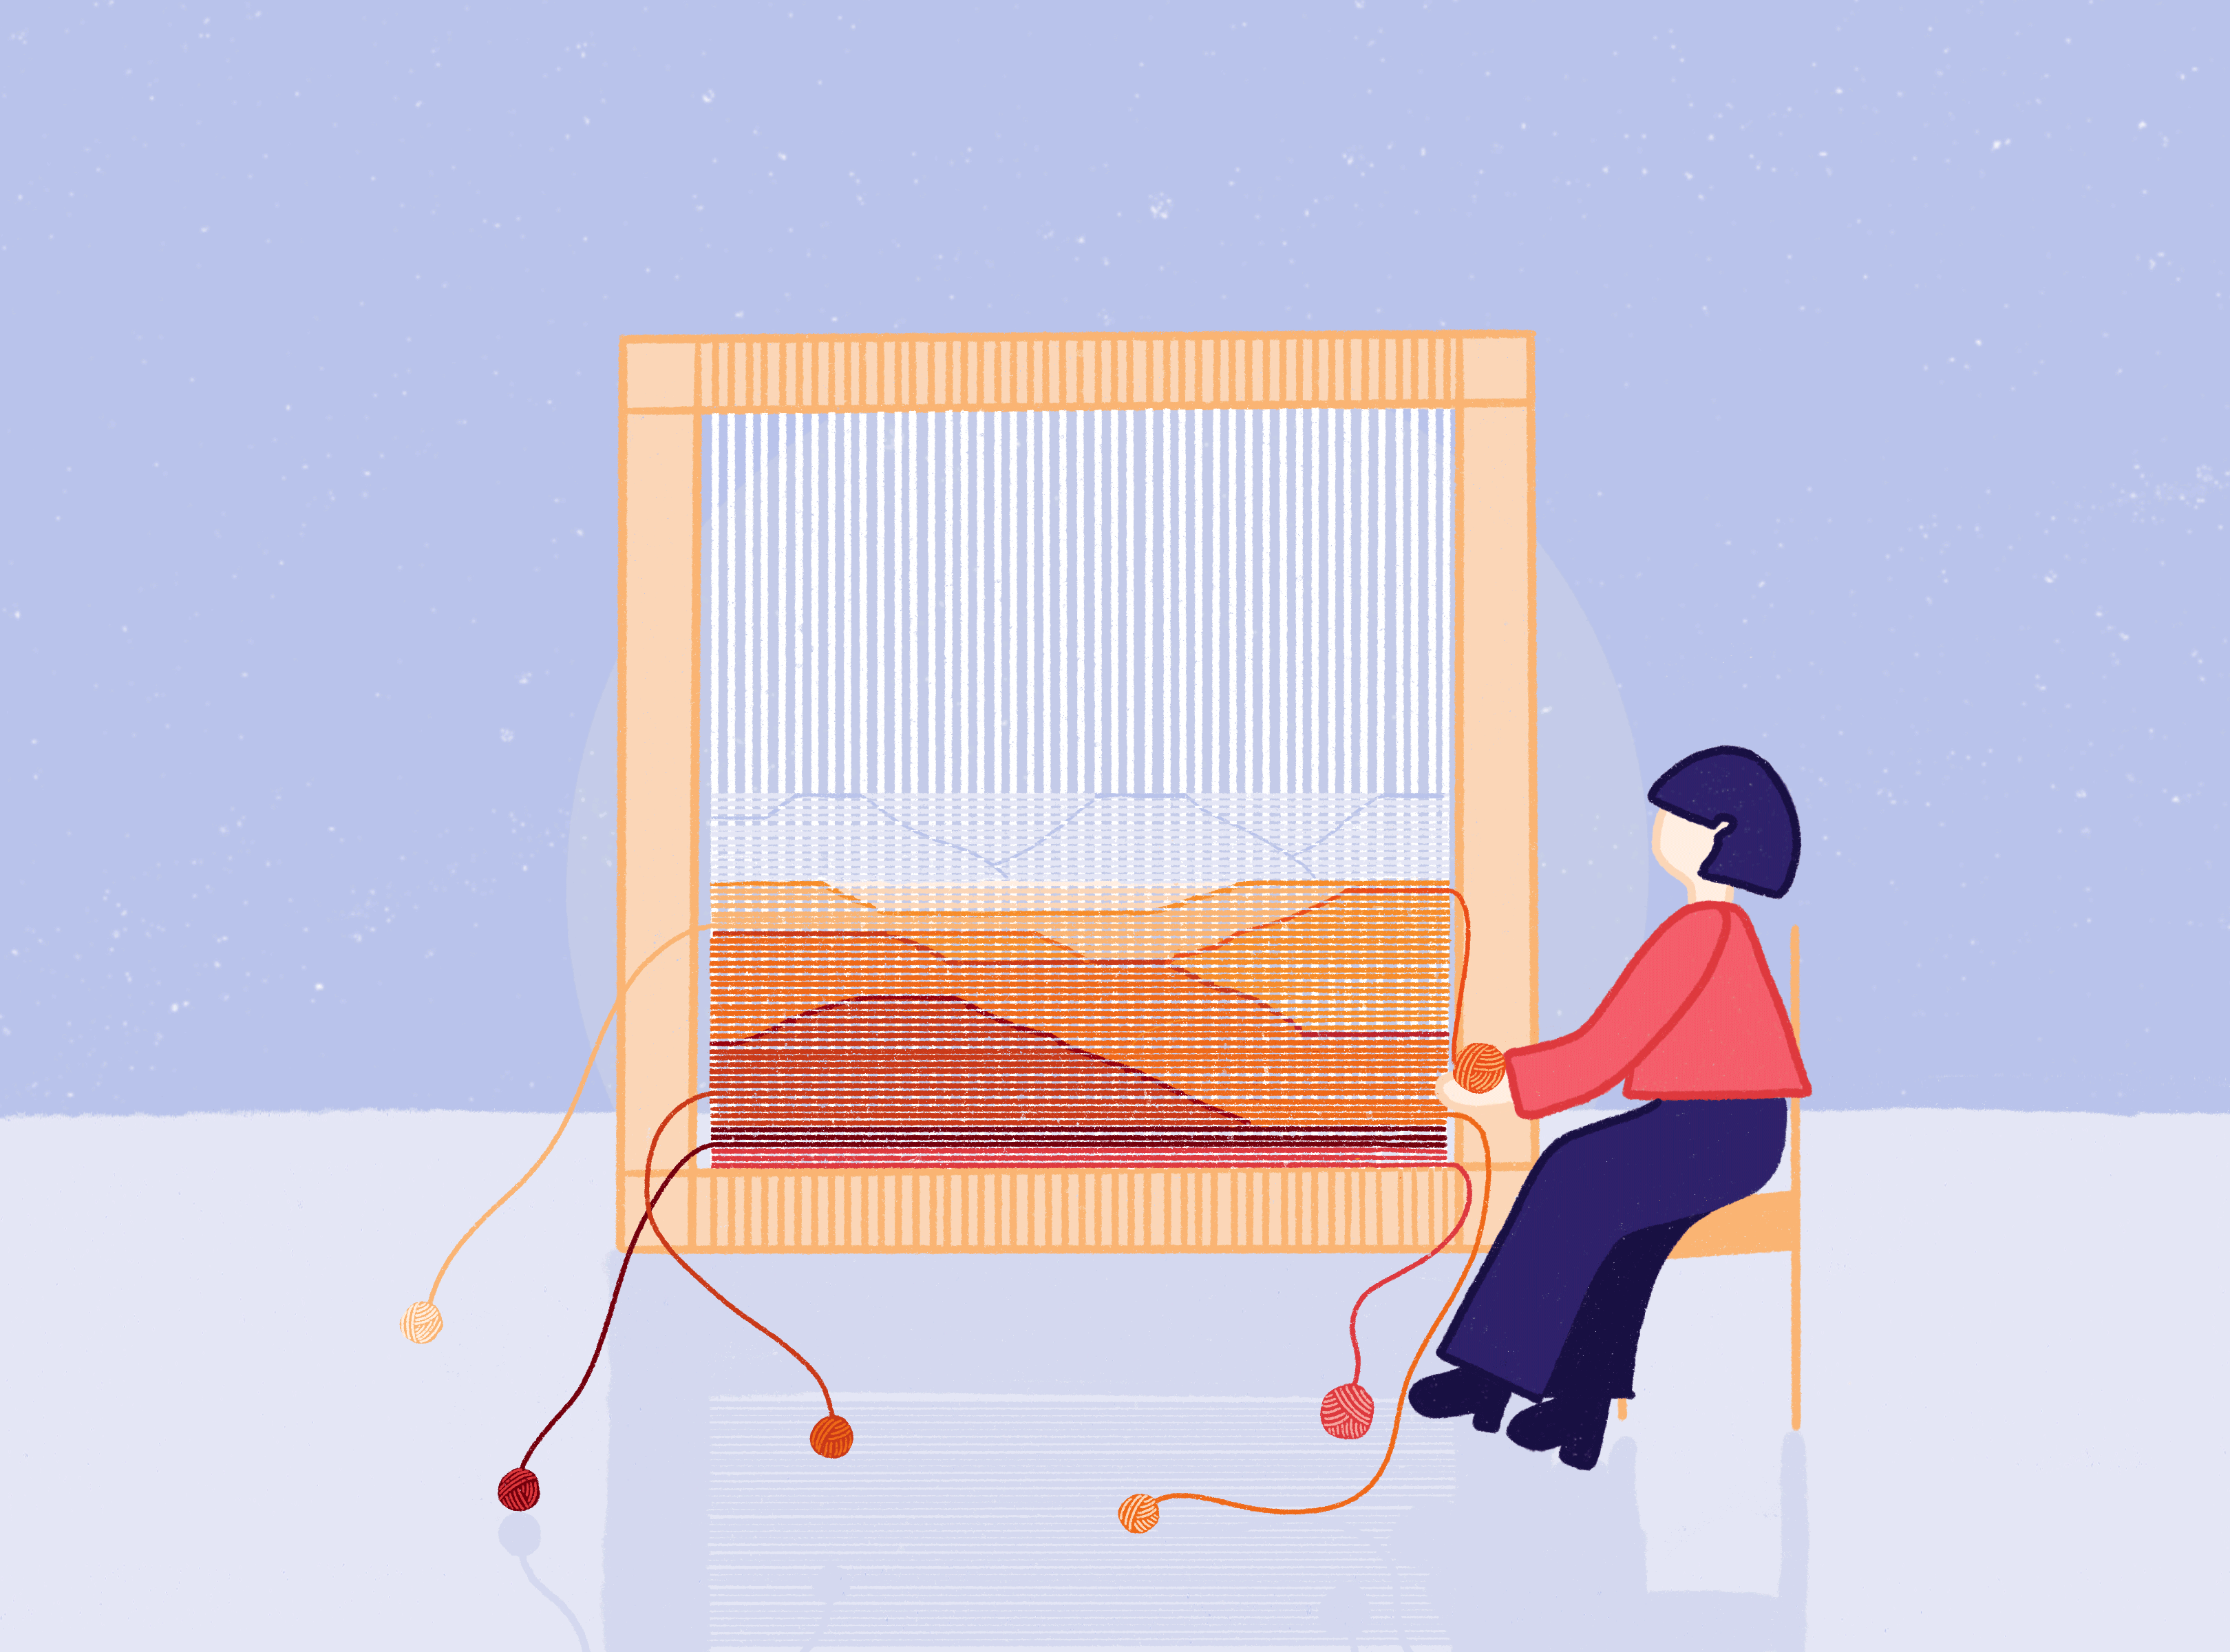 A woman works on a loom